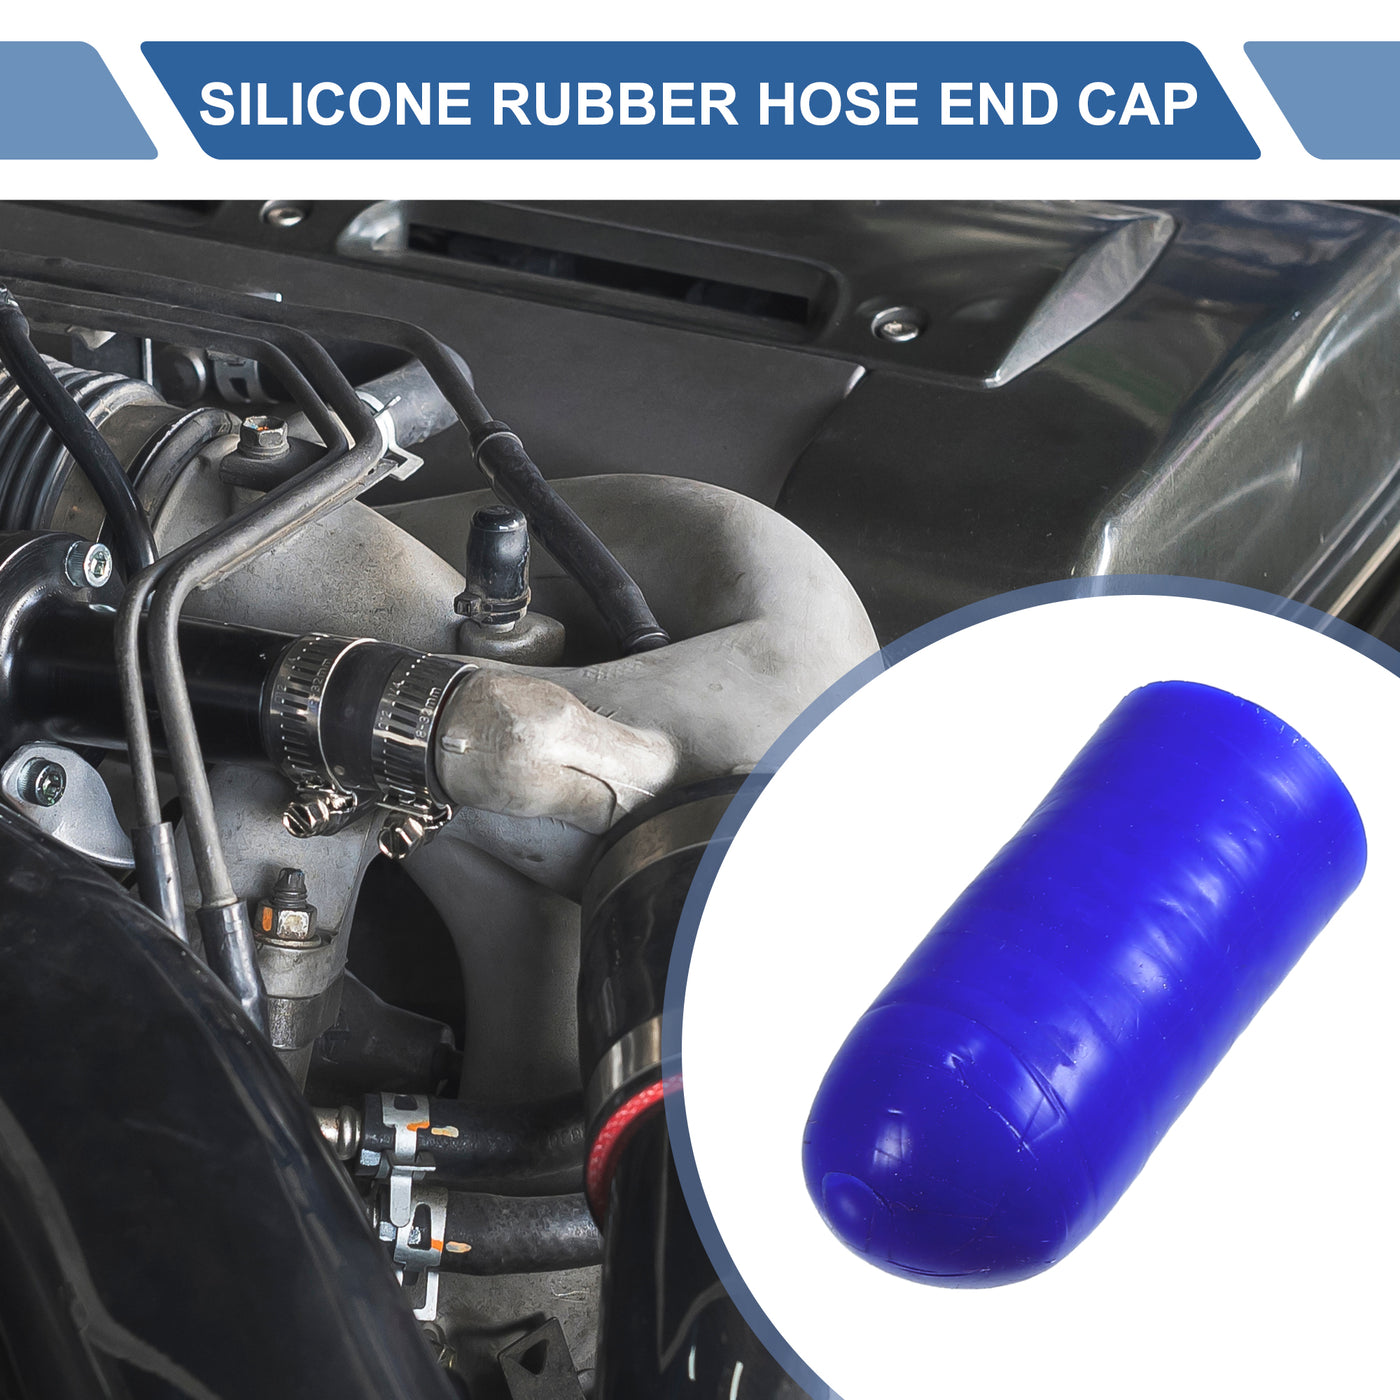 X AUTOHAUX 1 Set 30mm Length 10mm/0.39" ID Blue Car Silicone Rubber Hose End Cap with Clamps Silicone Reinforced Blanking Cap for Bypass Tube Universal